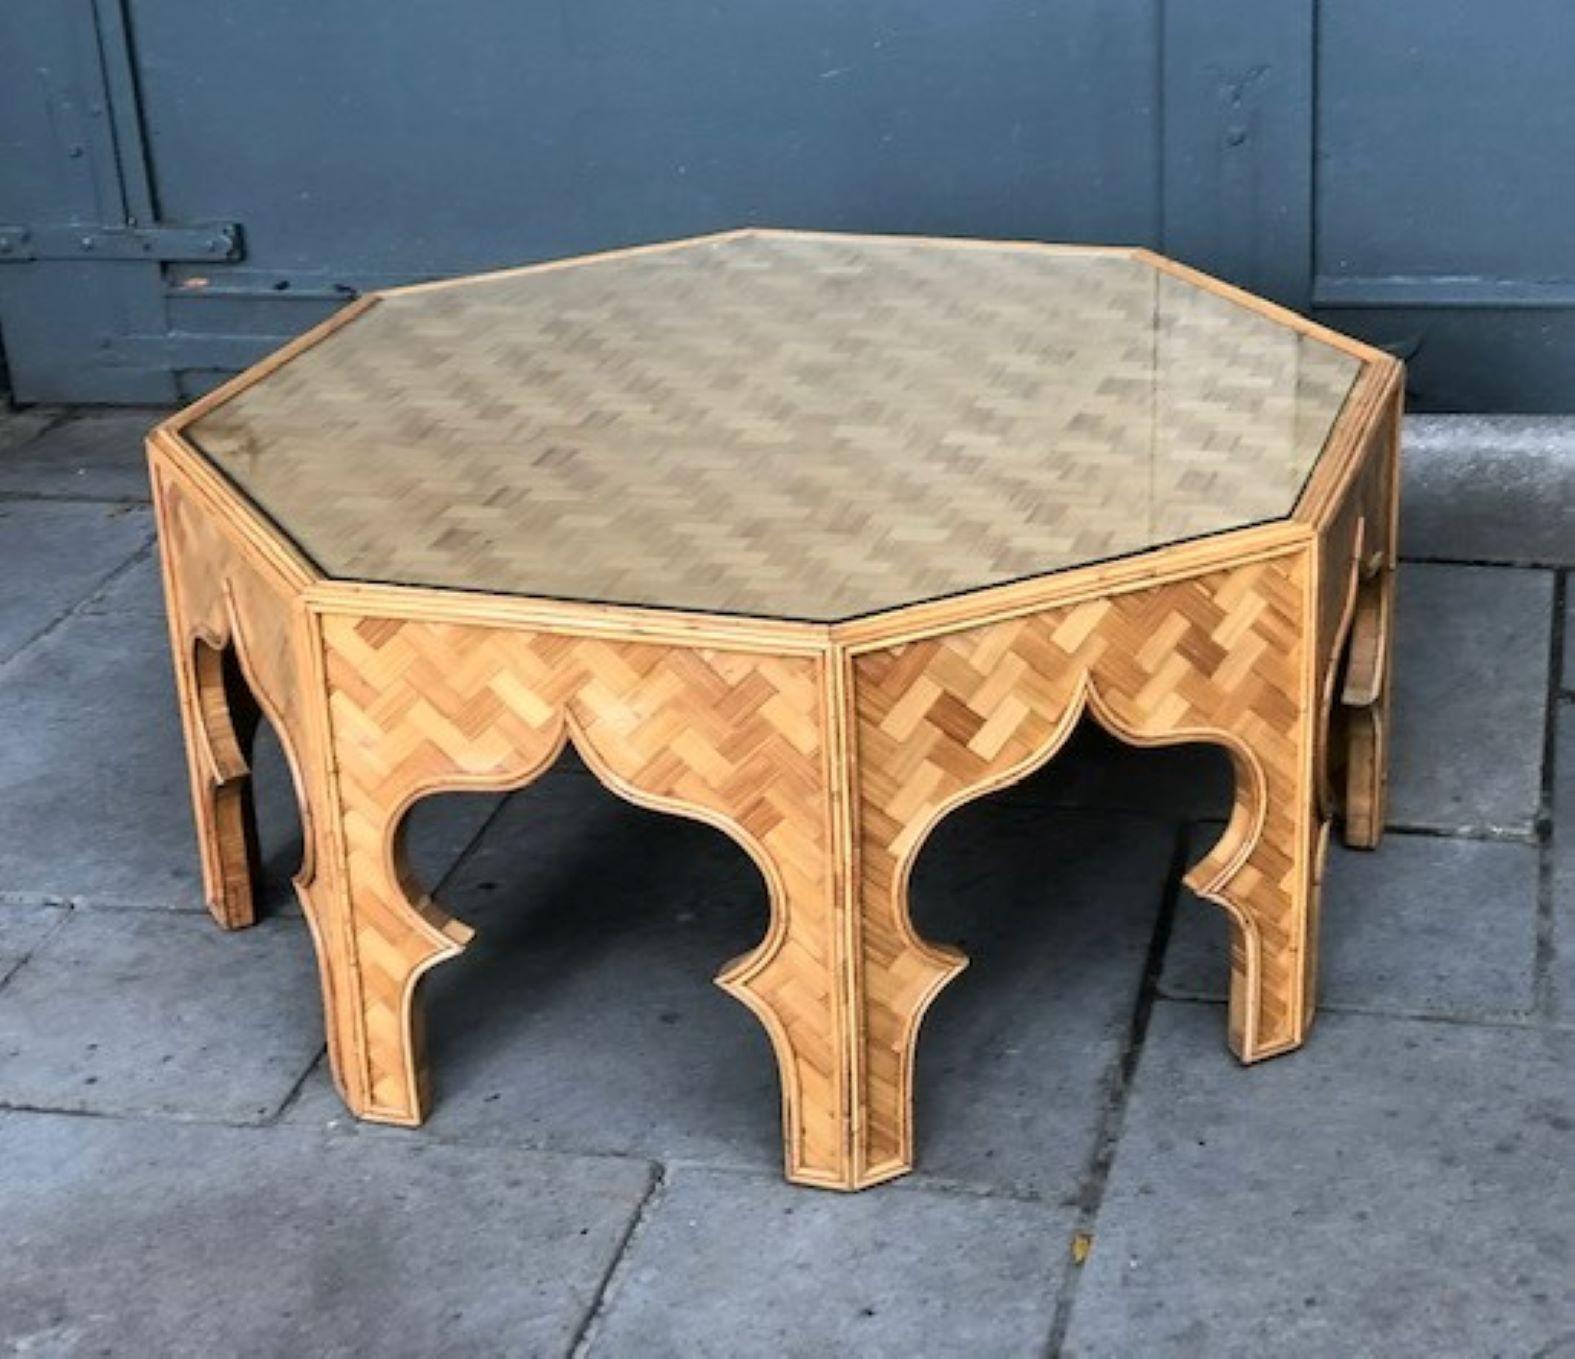 Mid century stick rattan & bamboo coffee table, Italian, 1970s

Magnificent mid-century octagonal stick rattan coffee table. 
Fantastic Moorish inspired coffee table, beautiful detailed stick rattan framework, sides and top covered in bamboo